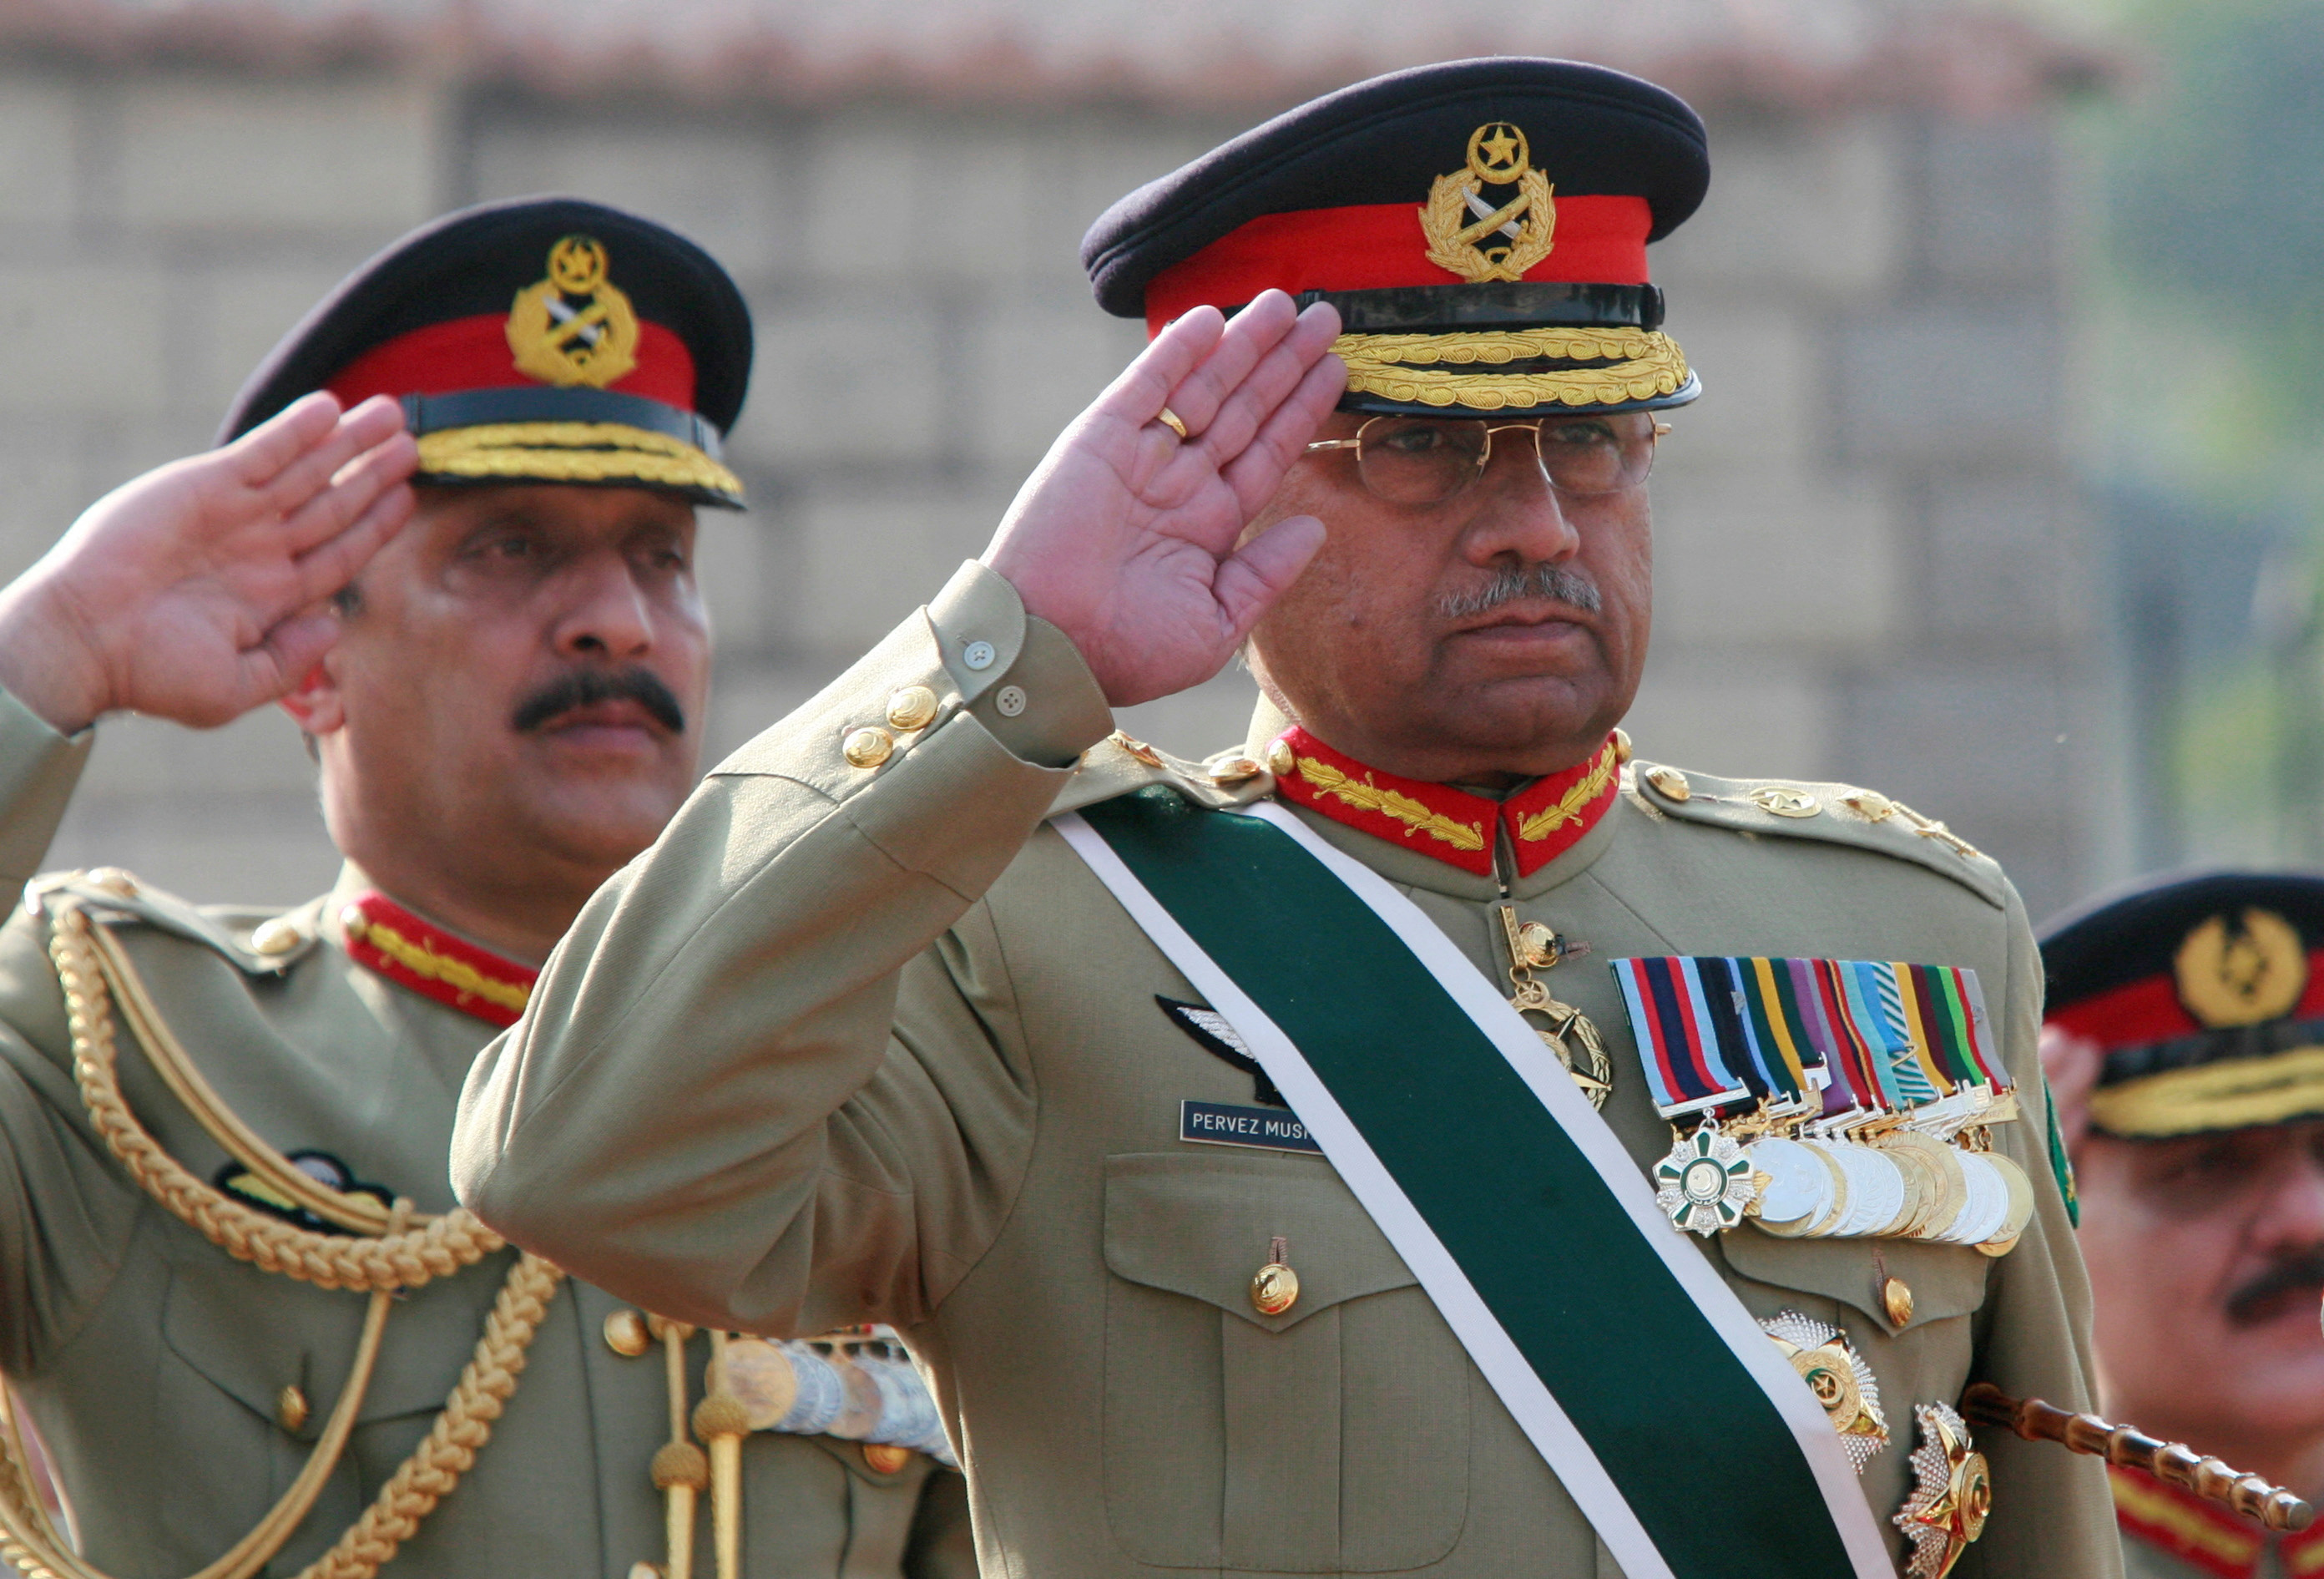 Pakistan's General Pervez Musharraf salutes during the playing of Pakistan's national anthem at the Joint Staff headquarters in Rawalpindi